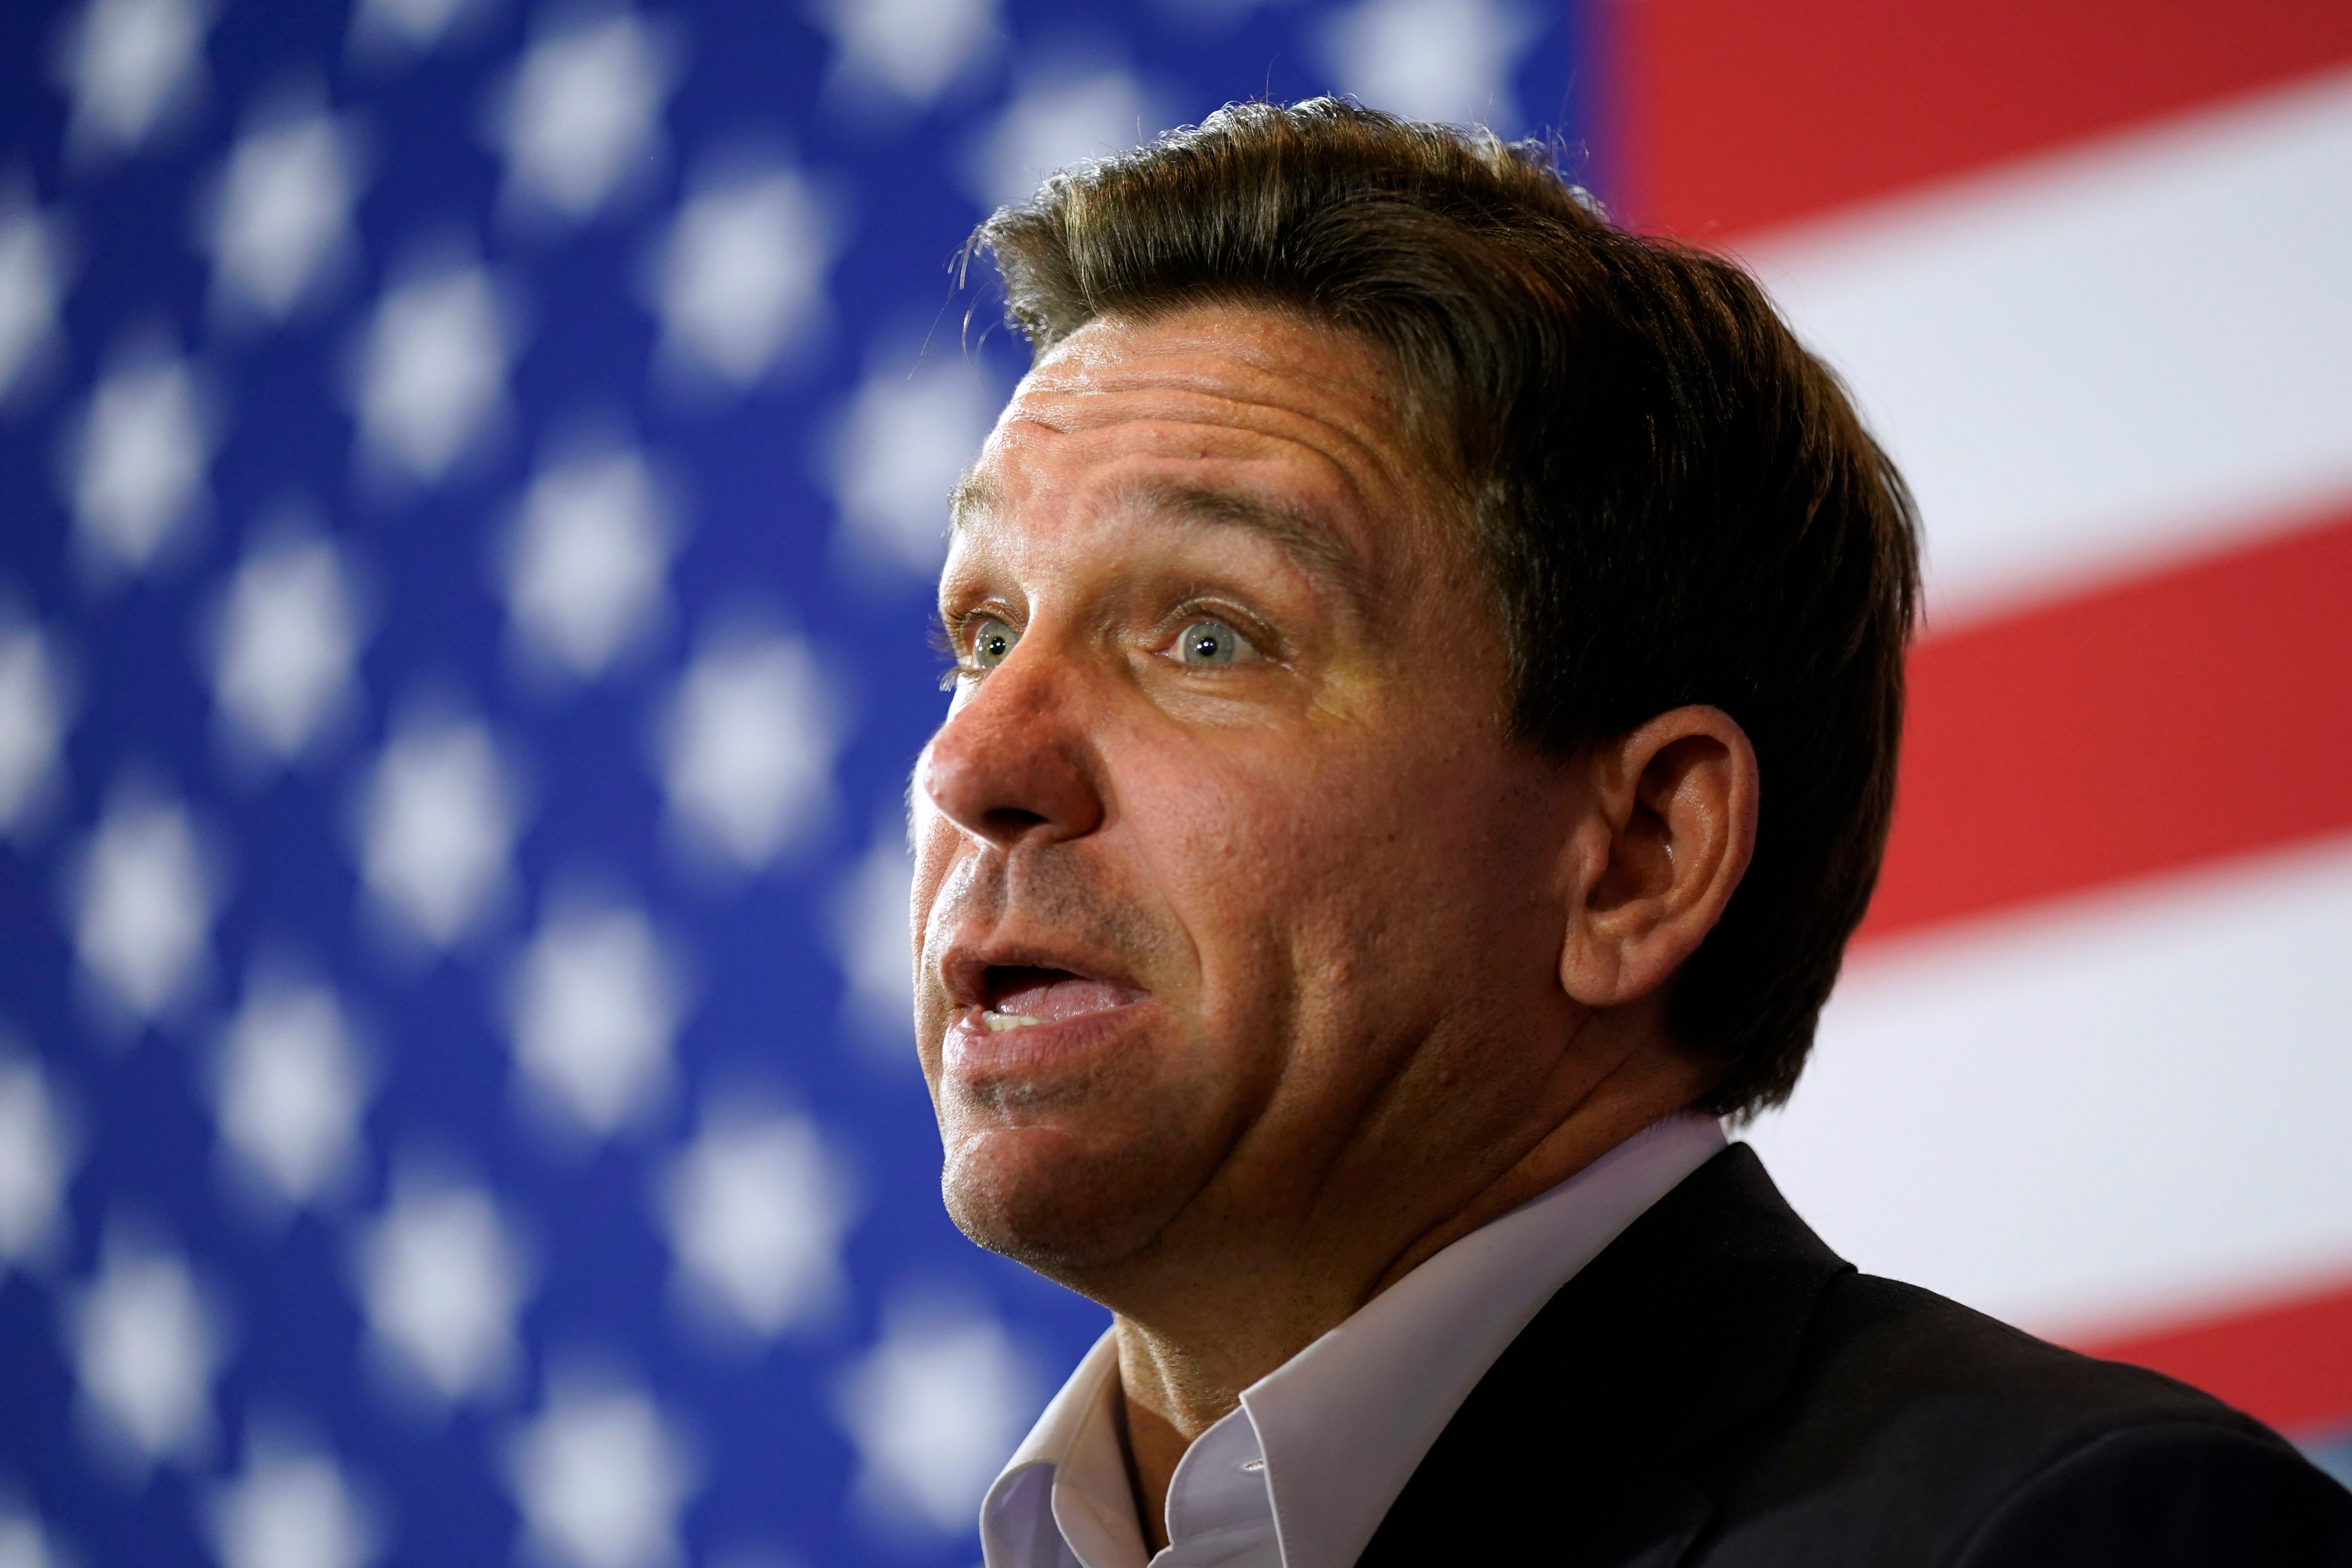 Republican presidential candidate Florida Gov. Ron DeSantis speaks to the media after a meet and greet on 7 December